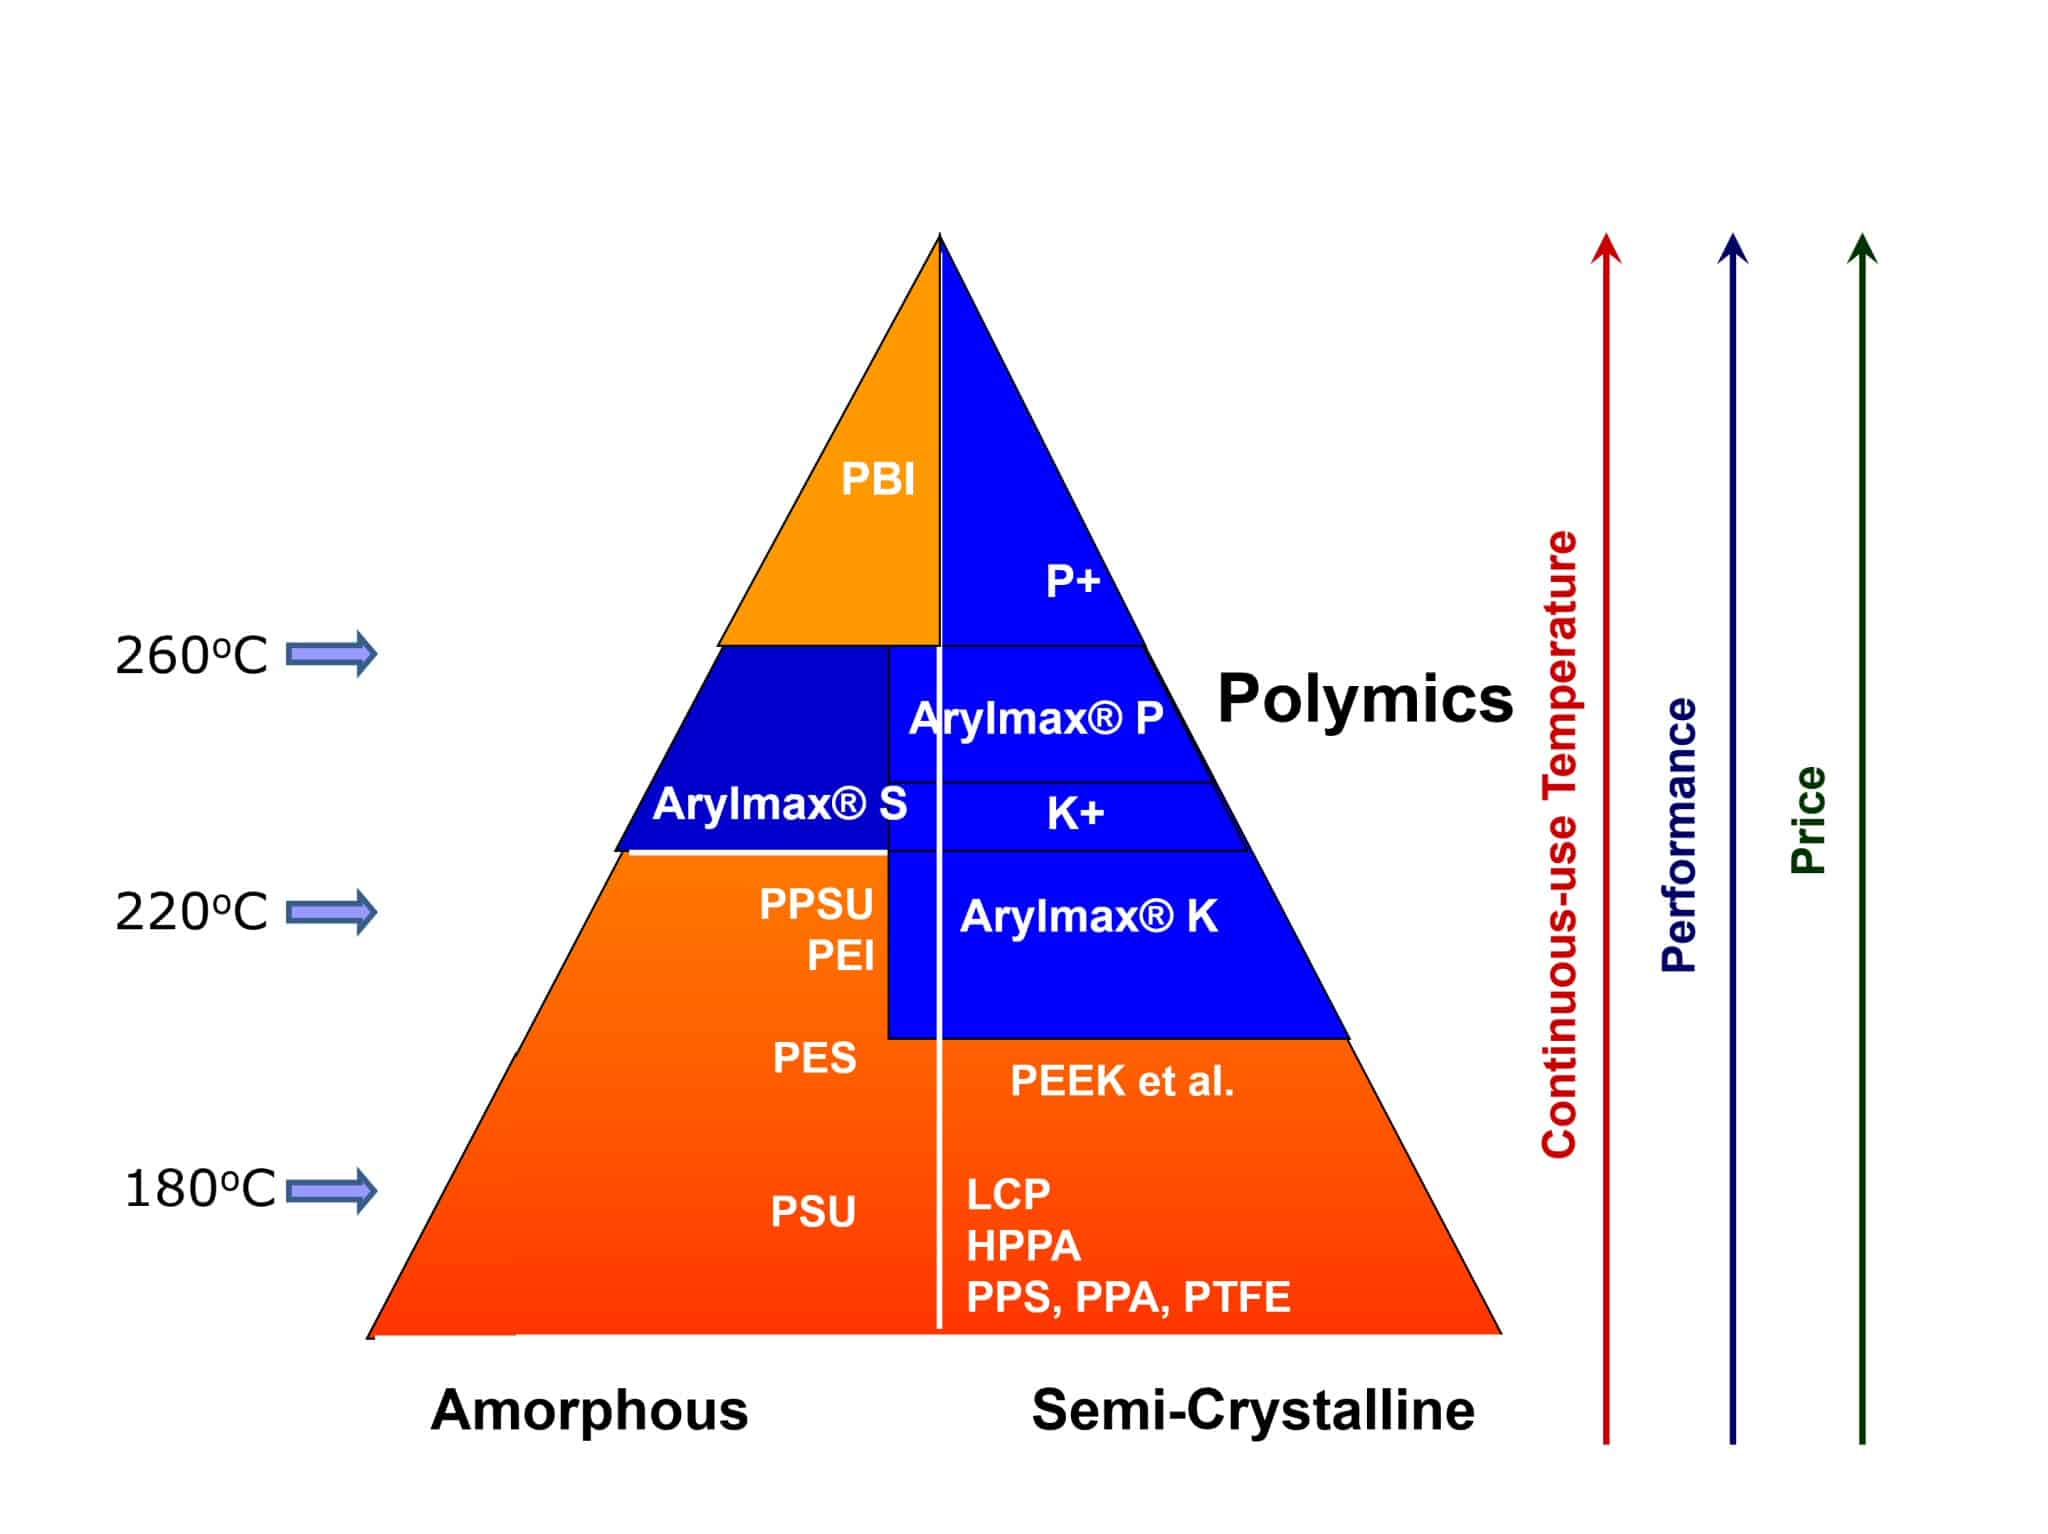 Arylmax Polymers by Polymics High Temperature Polymers